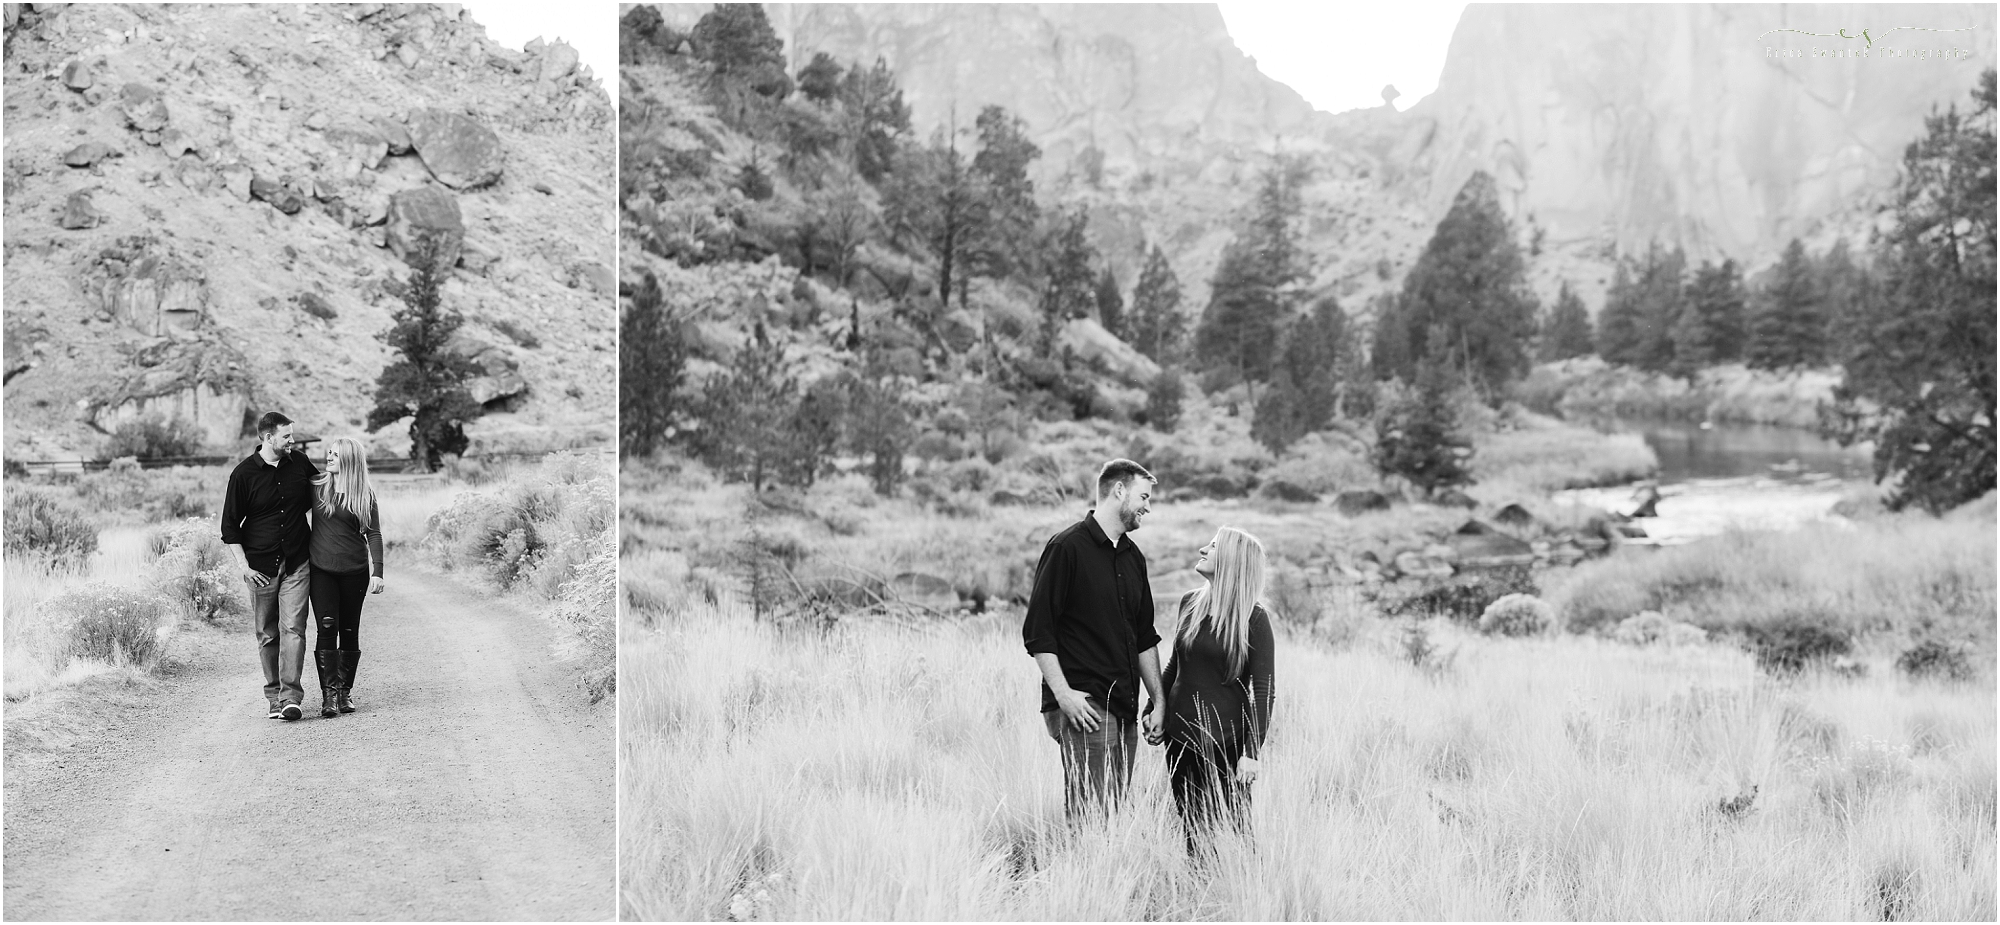 Beautiful black and white engagement photos at Smith Rock State Park in Terrebonne, Oregon. | Erica Swantek Photography